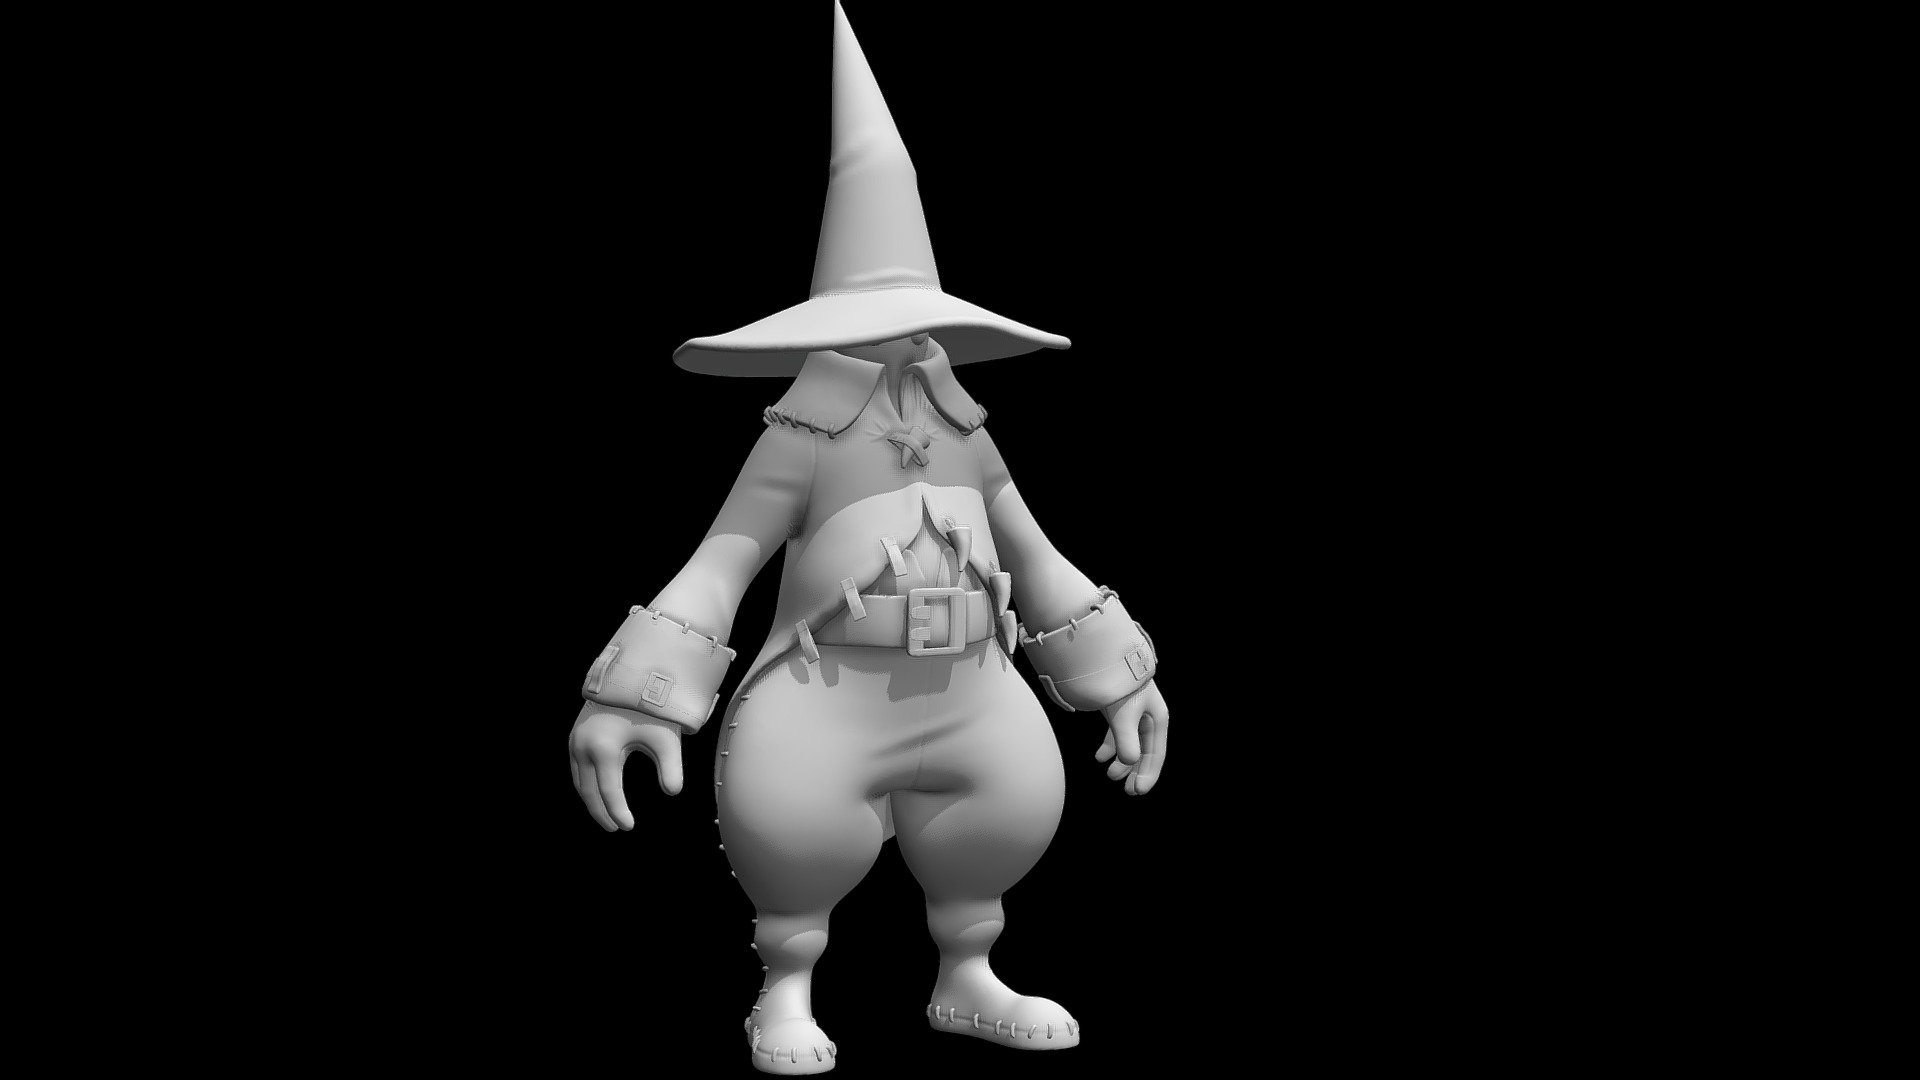 Hey there folks!

This is a humble tribute to my favorite Final Fantasy game from the whole franchise, I really love the Black Mages from FFIX, I think they got the best style 3d model